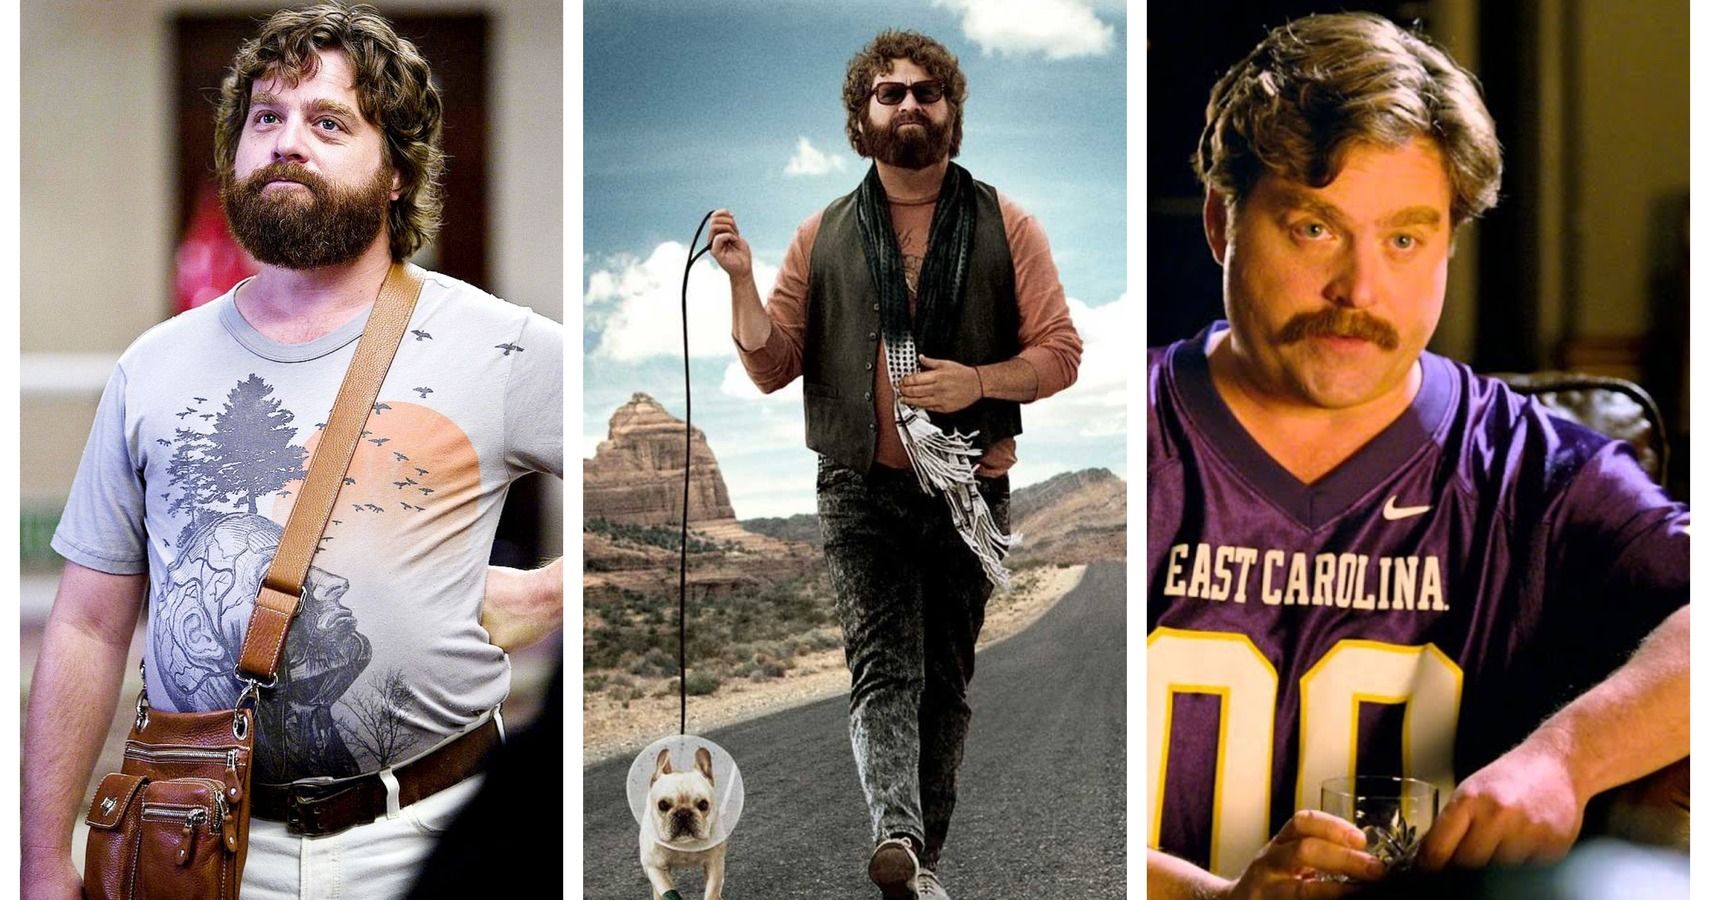 10 Of Zach Galifianakis' Most Hilarious Movie Punchlines, Ranked